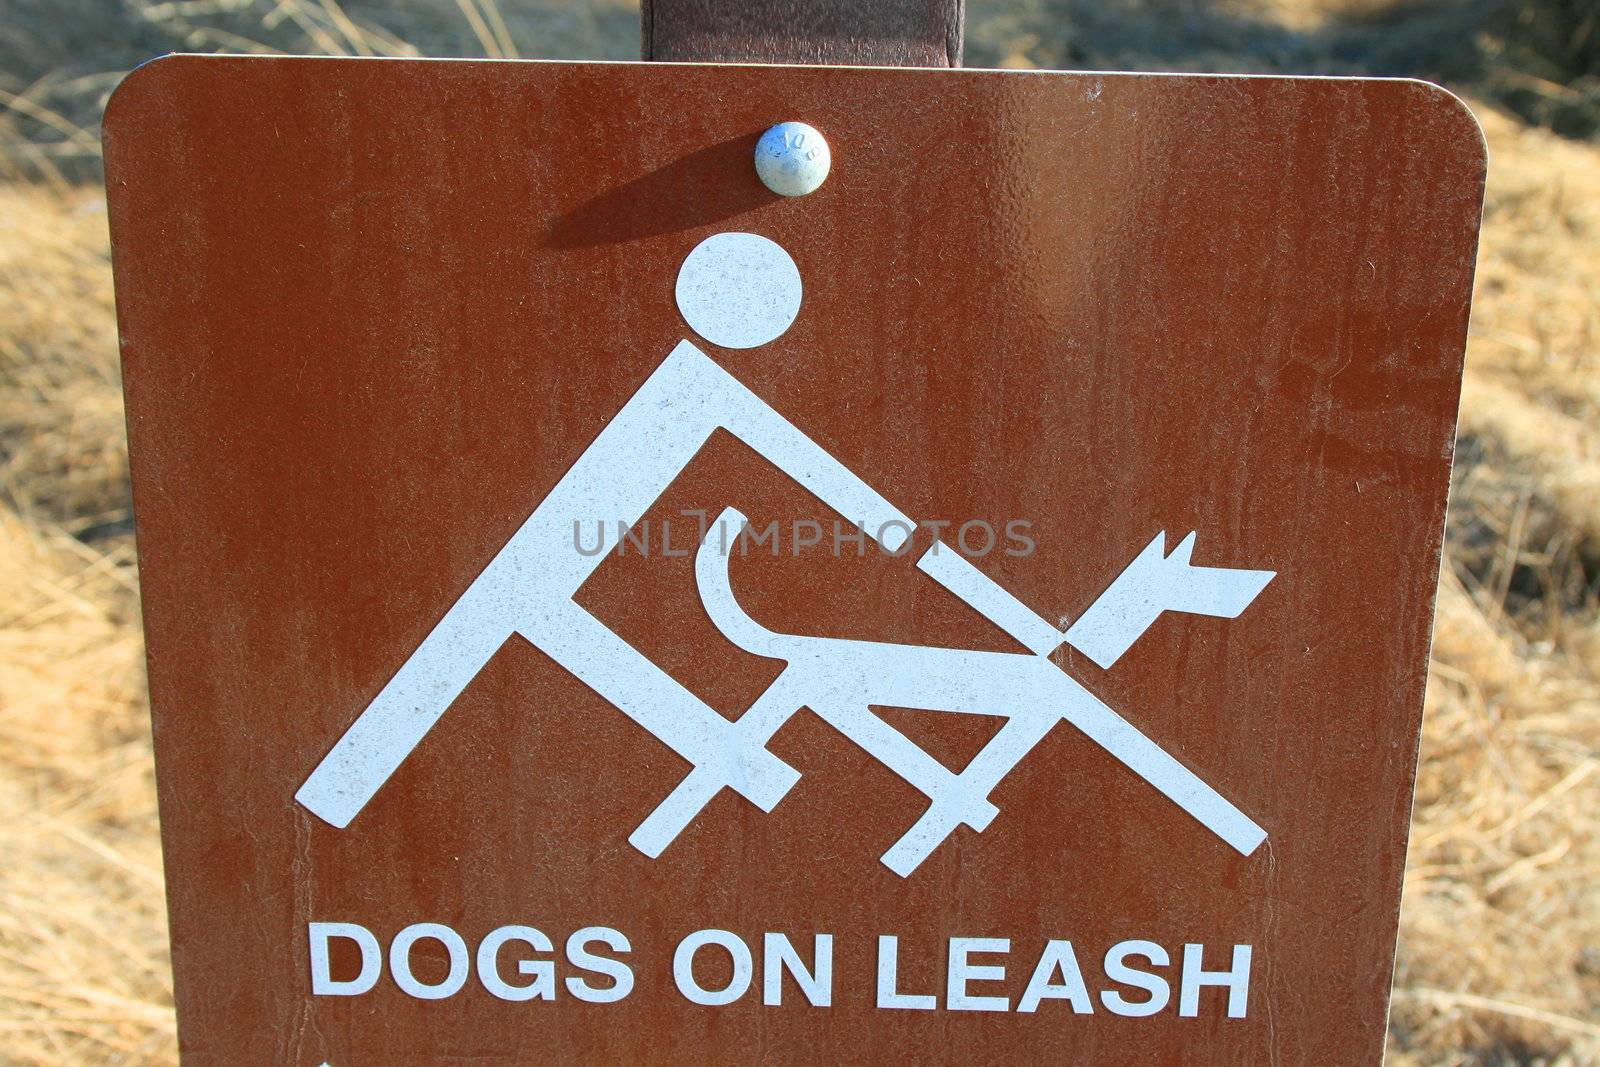 Close up of dogs on leash sign.
